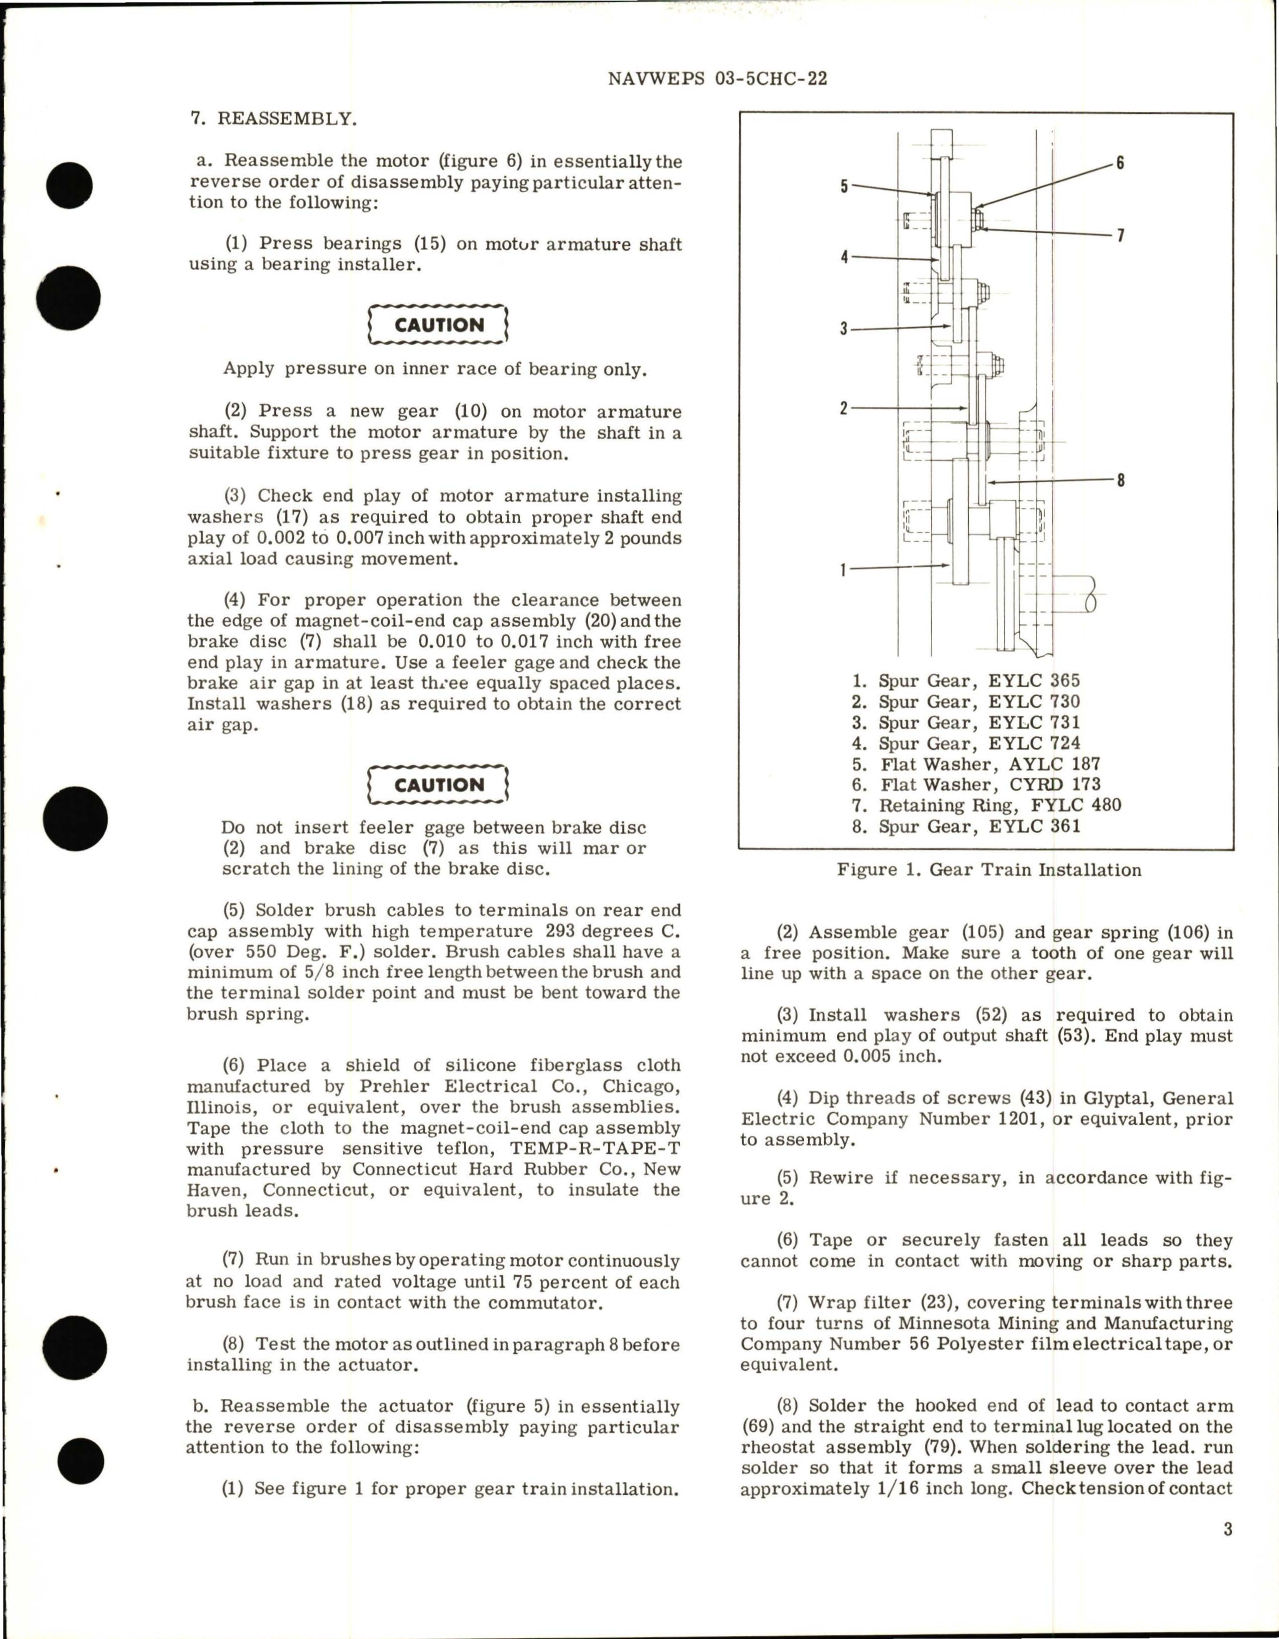 Sample page 5 from AirCorps Library document: Overhaul Instructions with Parts Breakdown for Electromechanical Rotary Actuator - Part FYLC 7683-4 